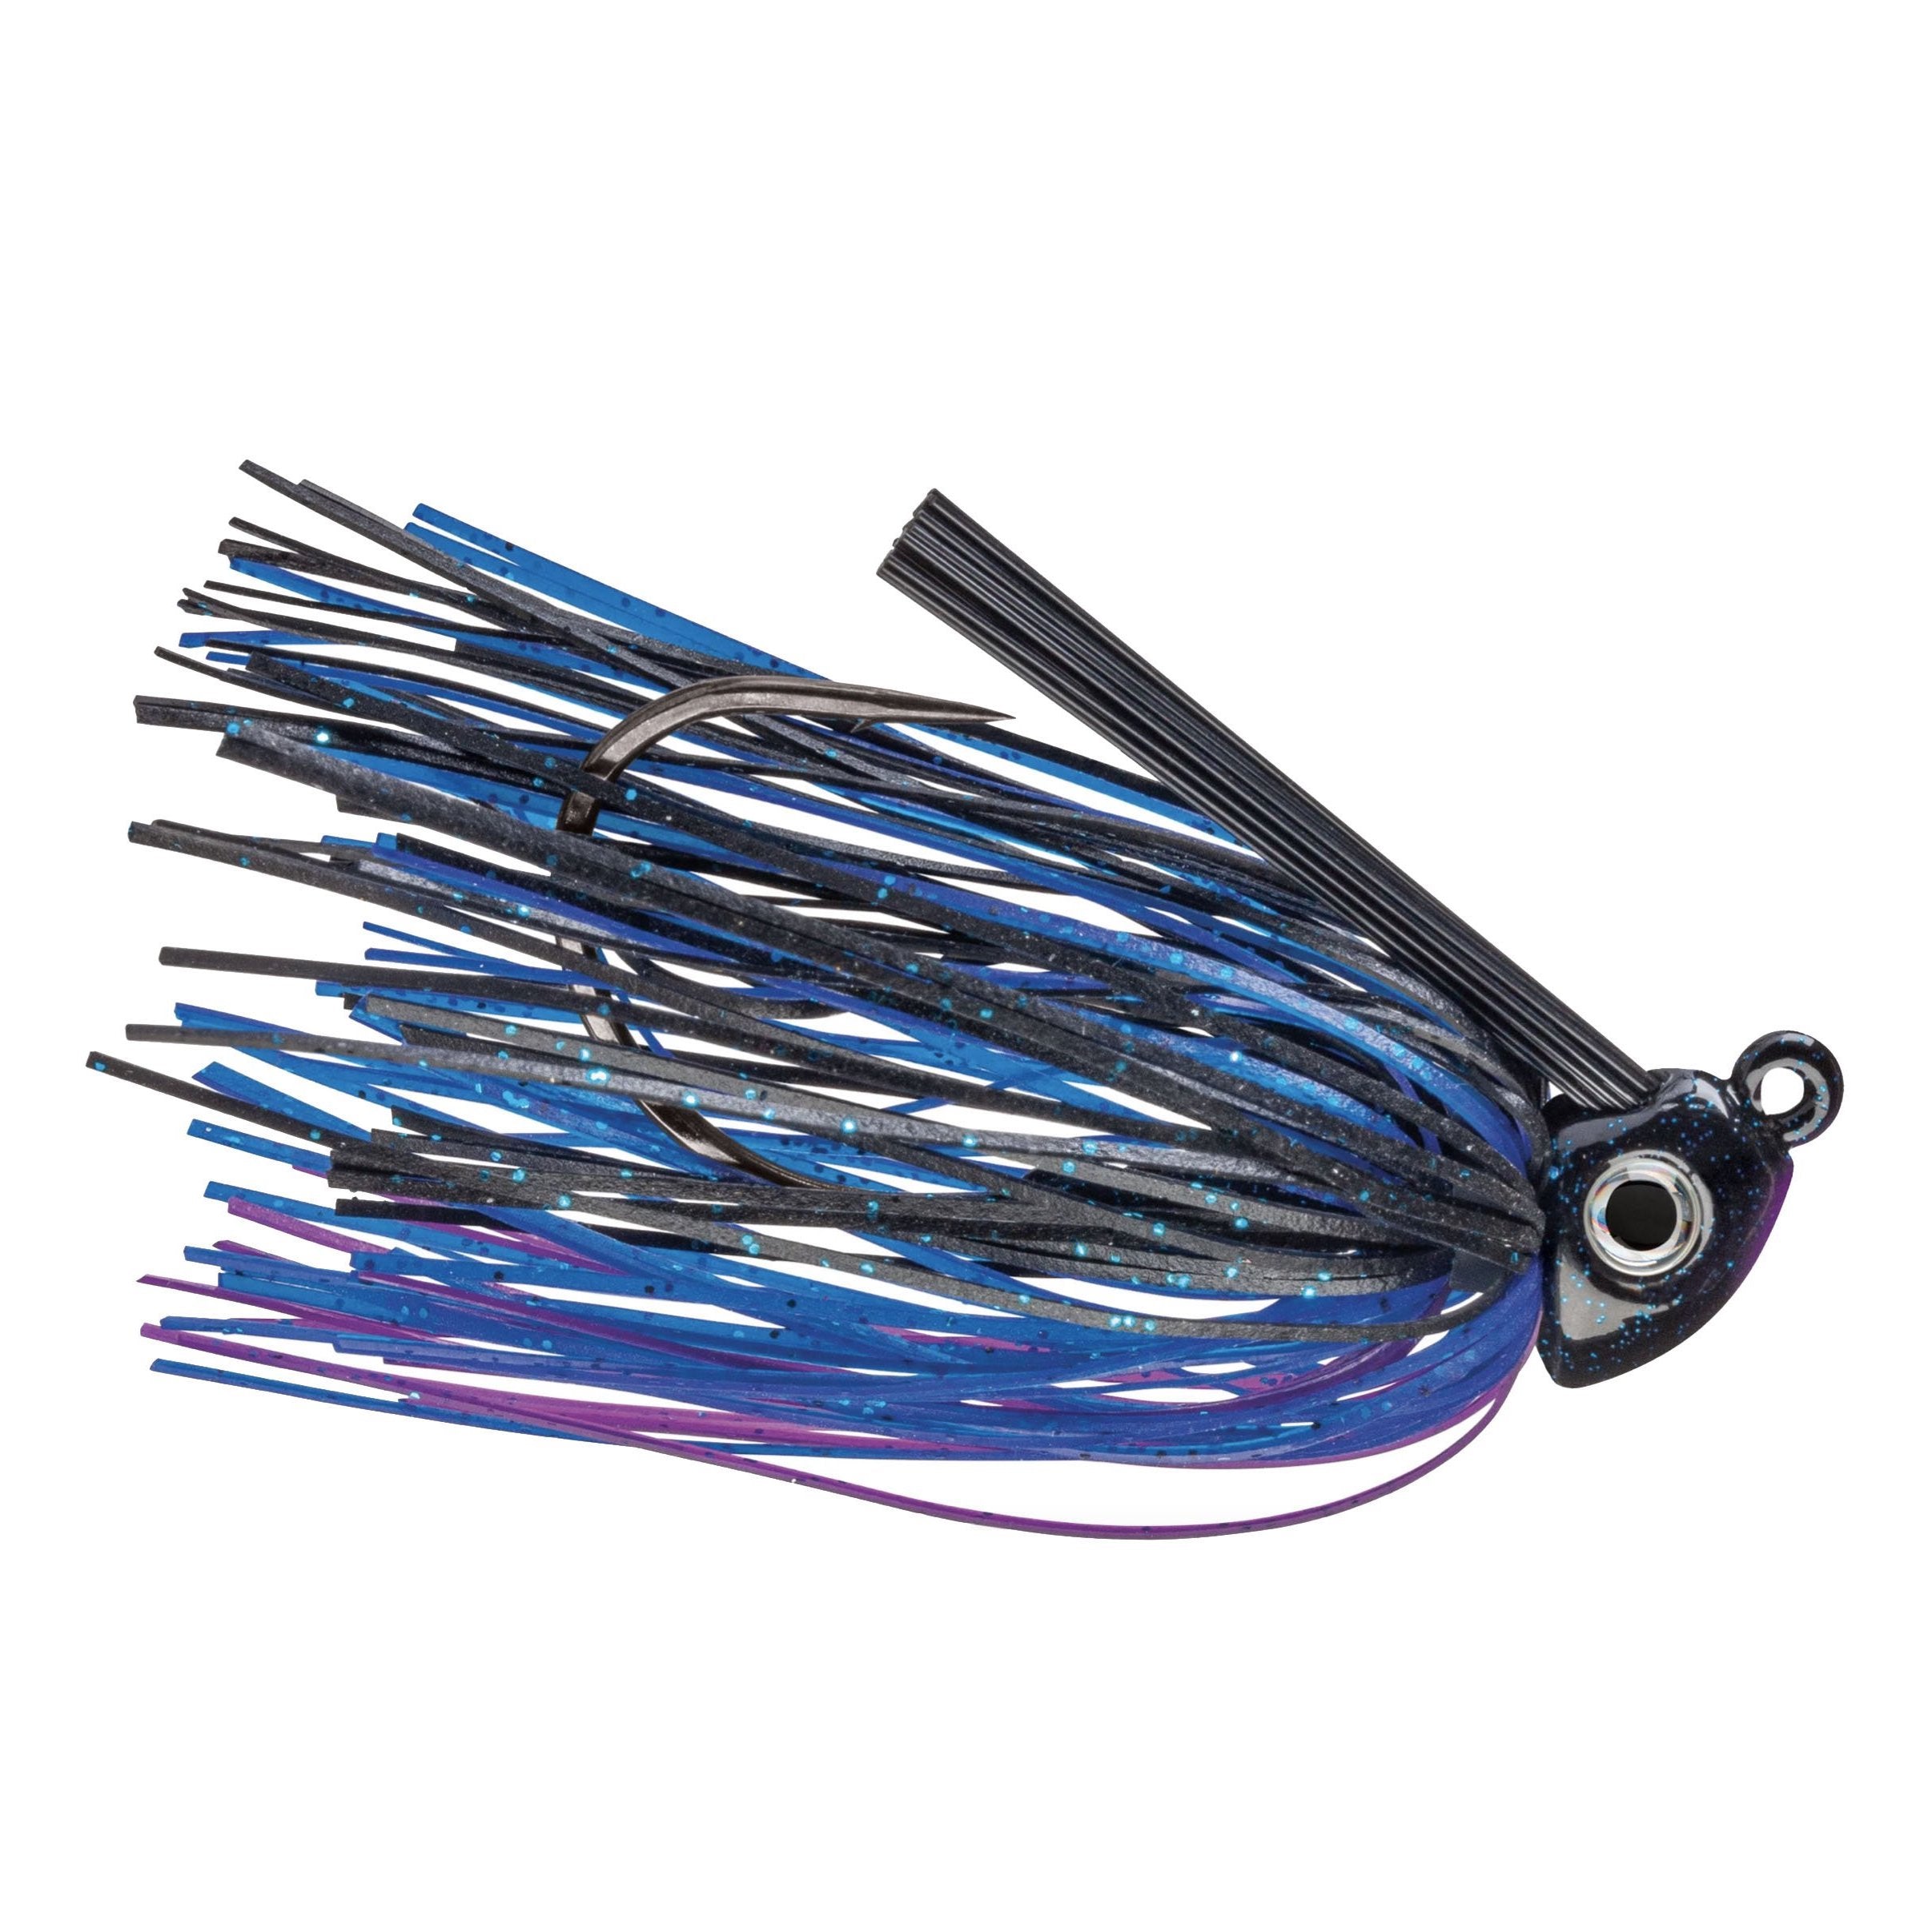 Here are the baits that will catch you bass through the entire